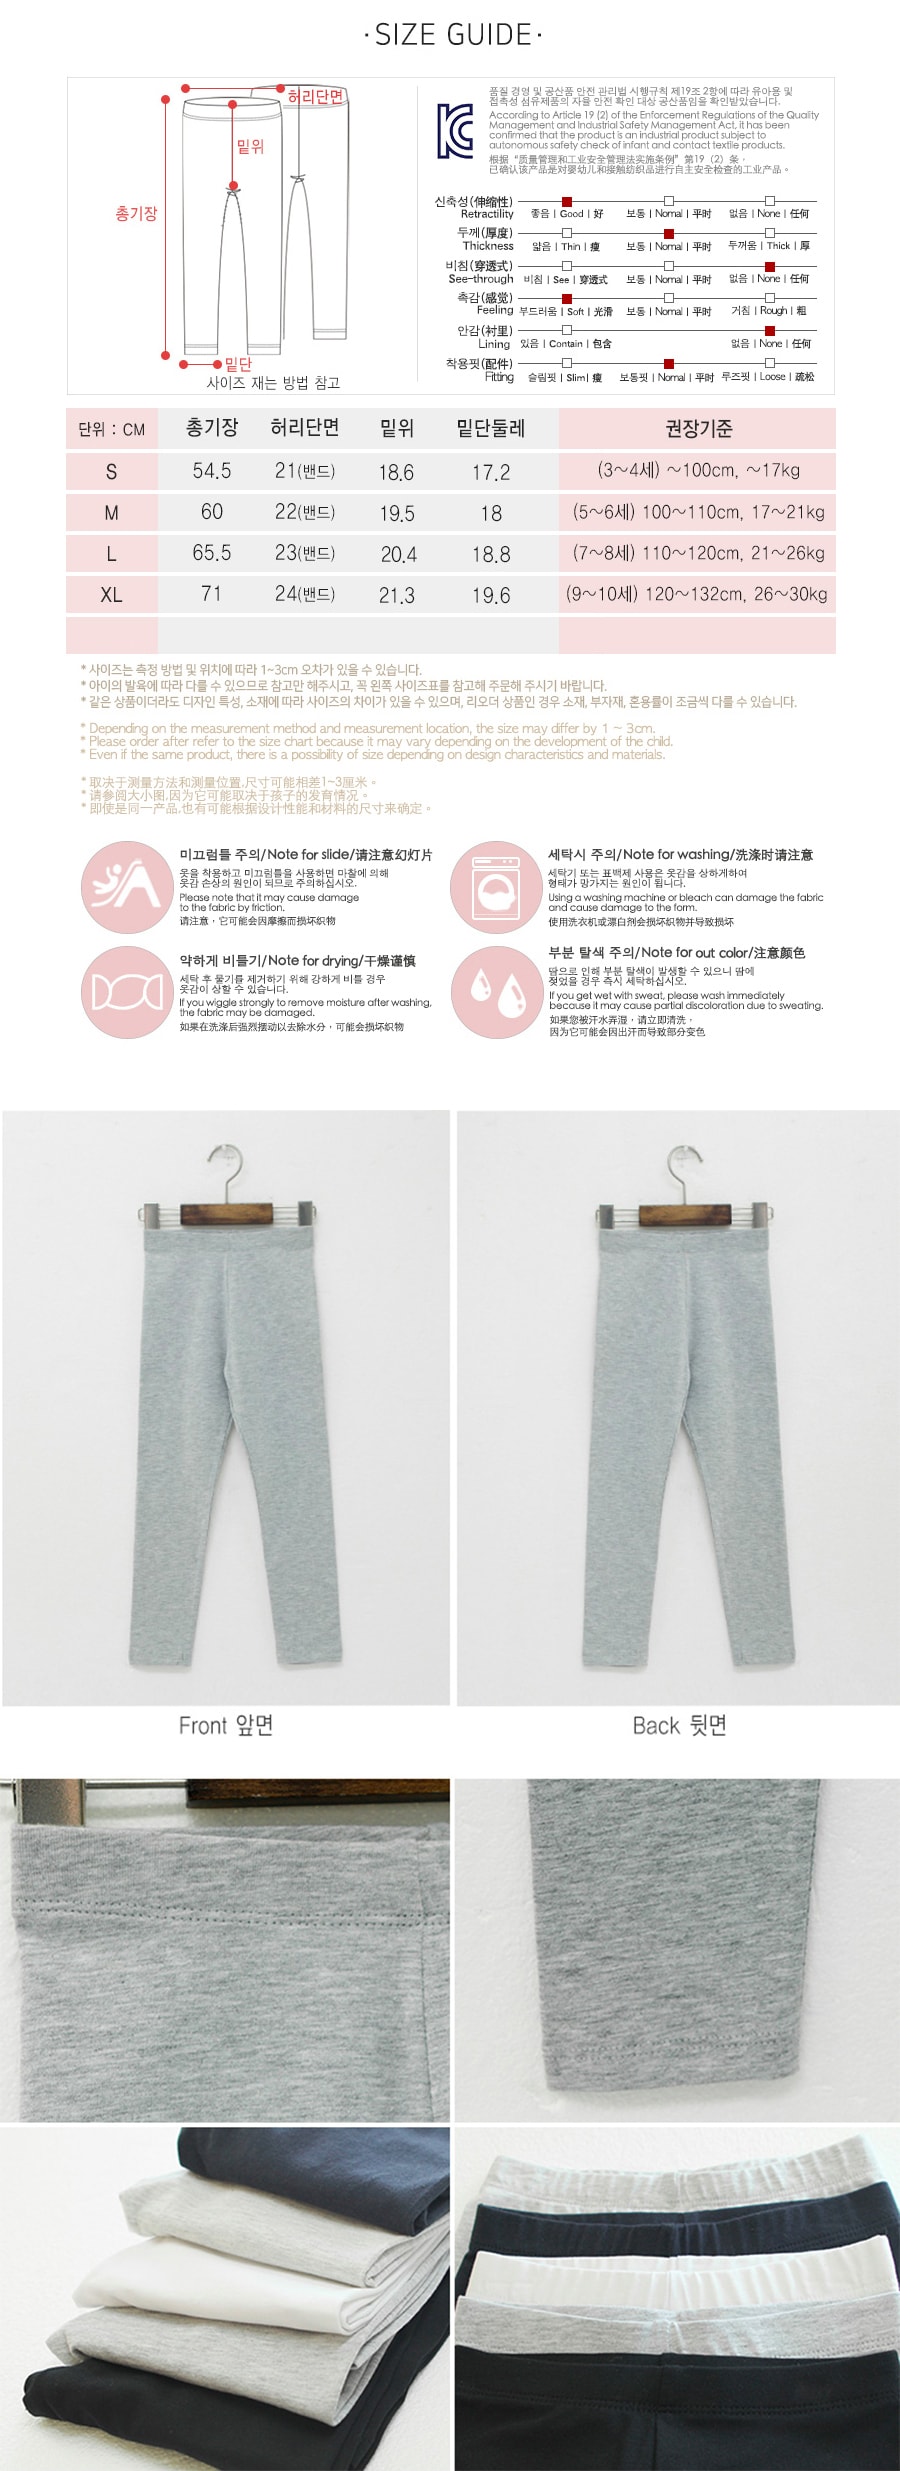 Kid Girl Stretch Cotton Leggings #Grey Size S(3-4 years)